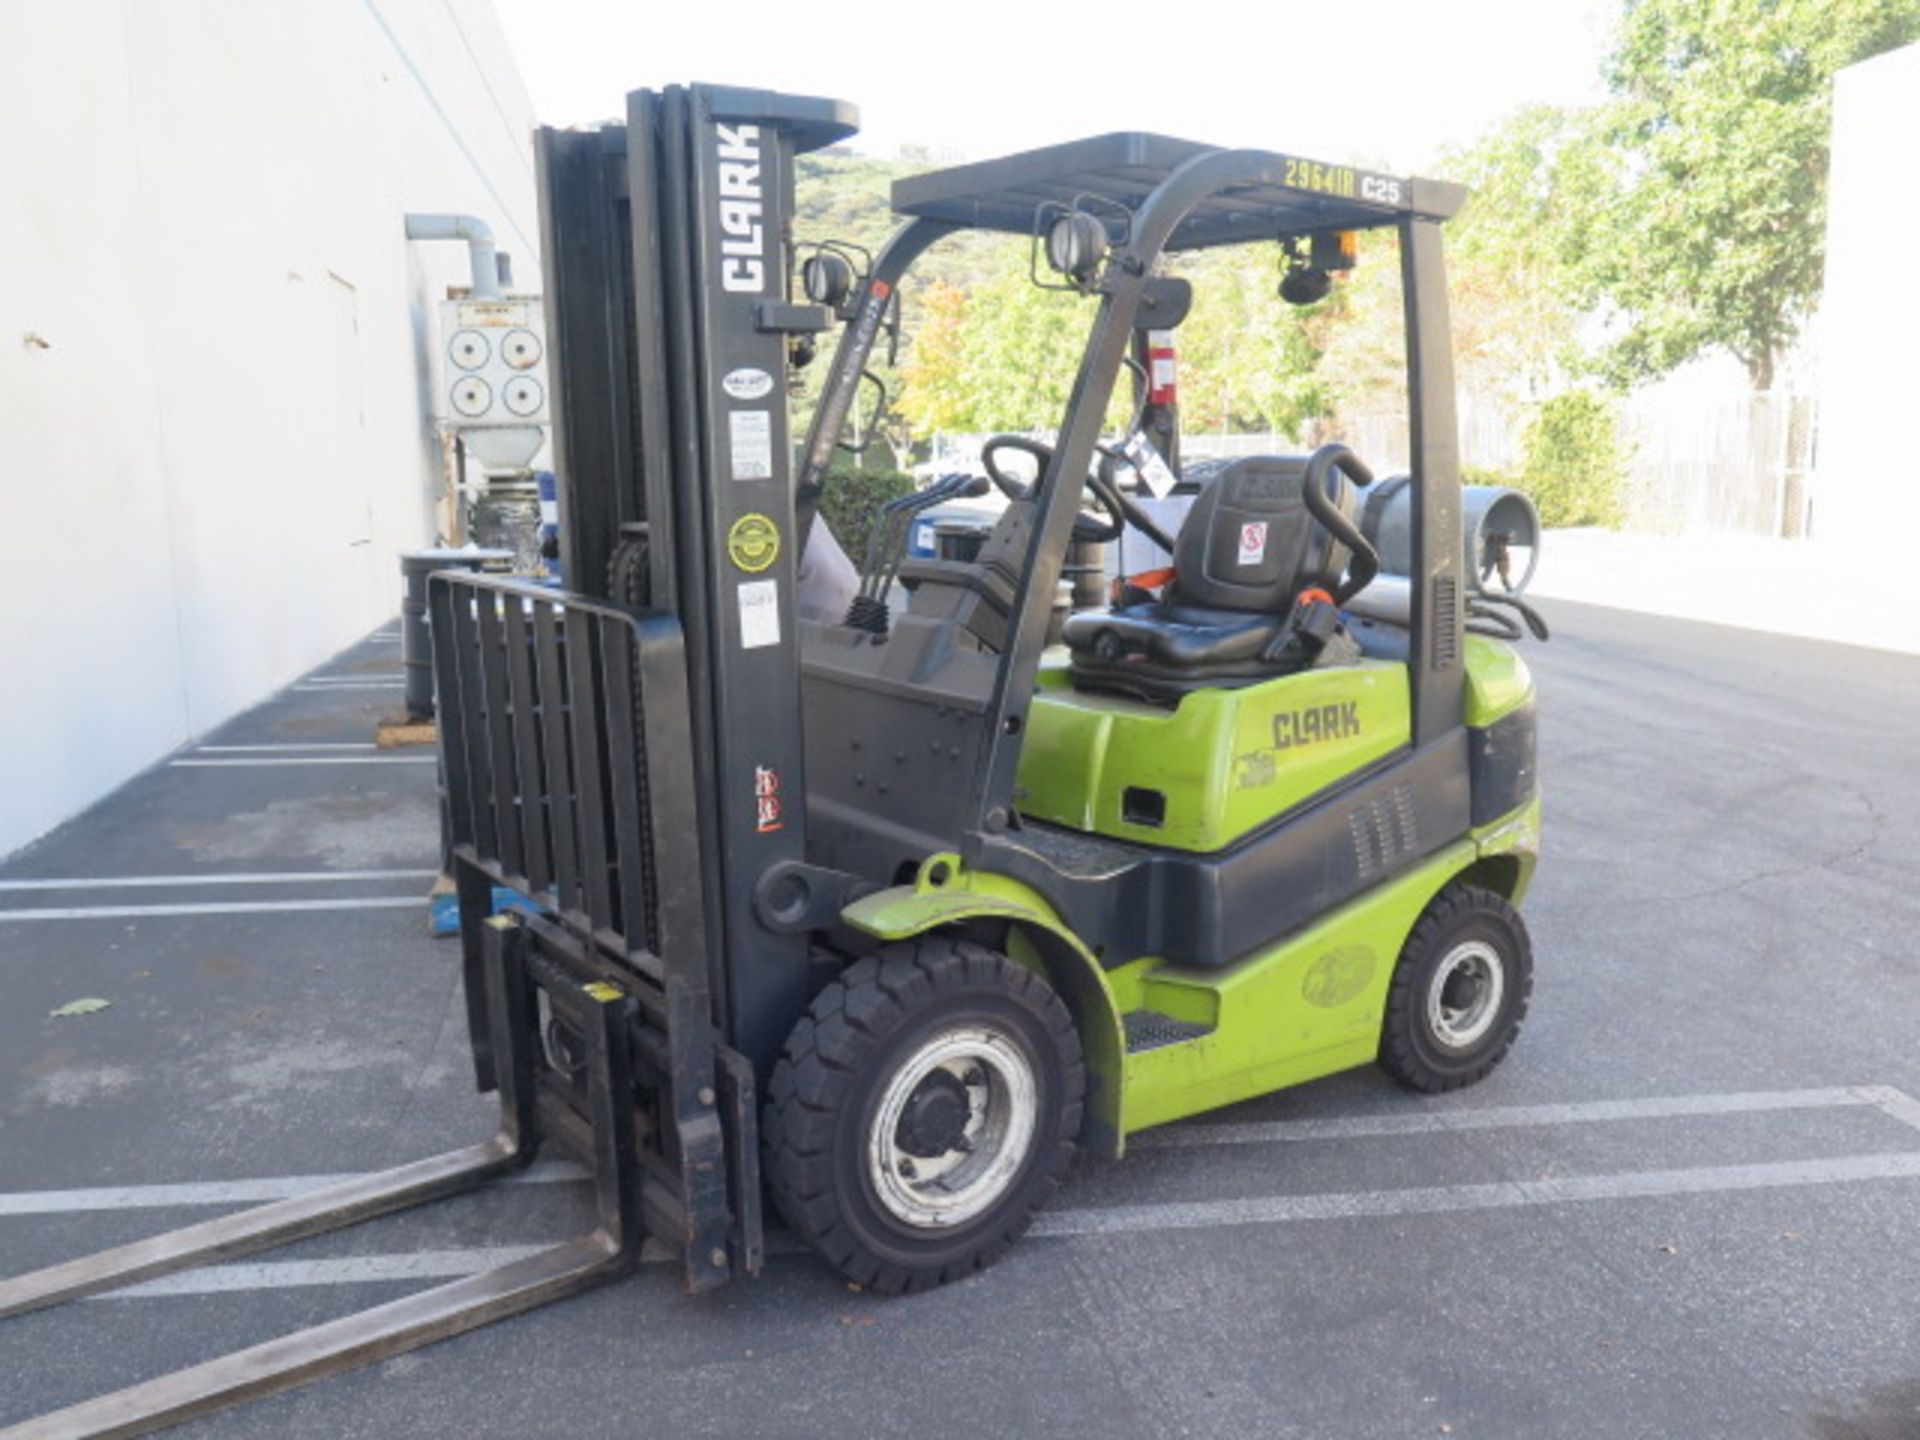 Clark C25 5000 Lb LPG Forklift s/n P-2321-0460-9862CNF w/ 3-Stage, 189" Lift, Side Shift, SOLD AS IS